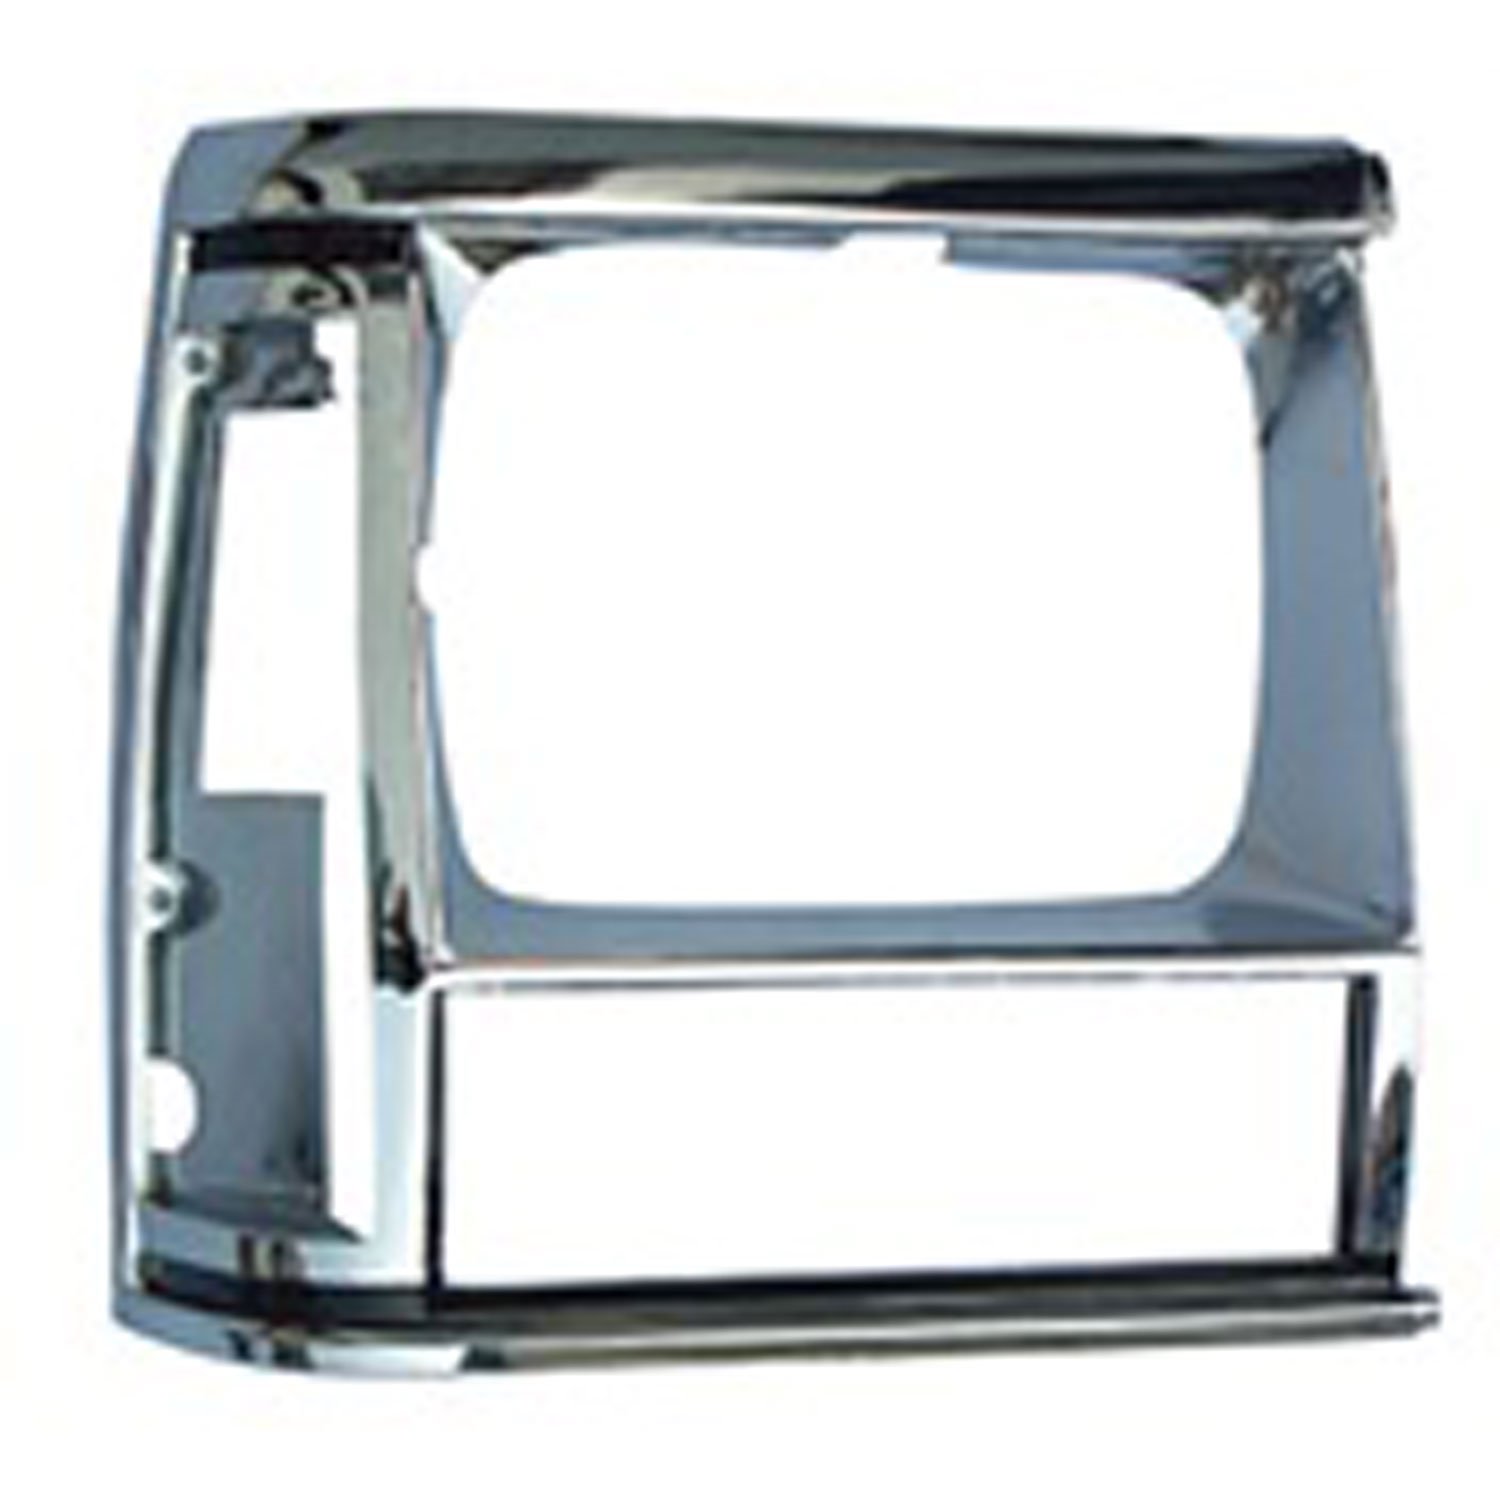 This chrome headlight bezel from Omix-ADA fits the right side on 84-90 Jeep Cherokee XJ.